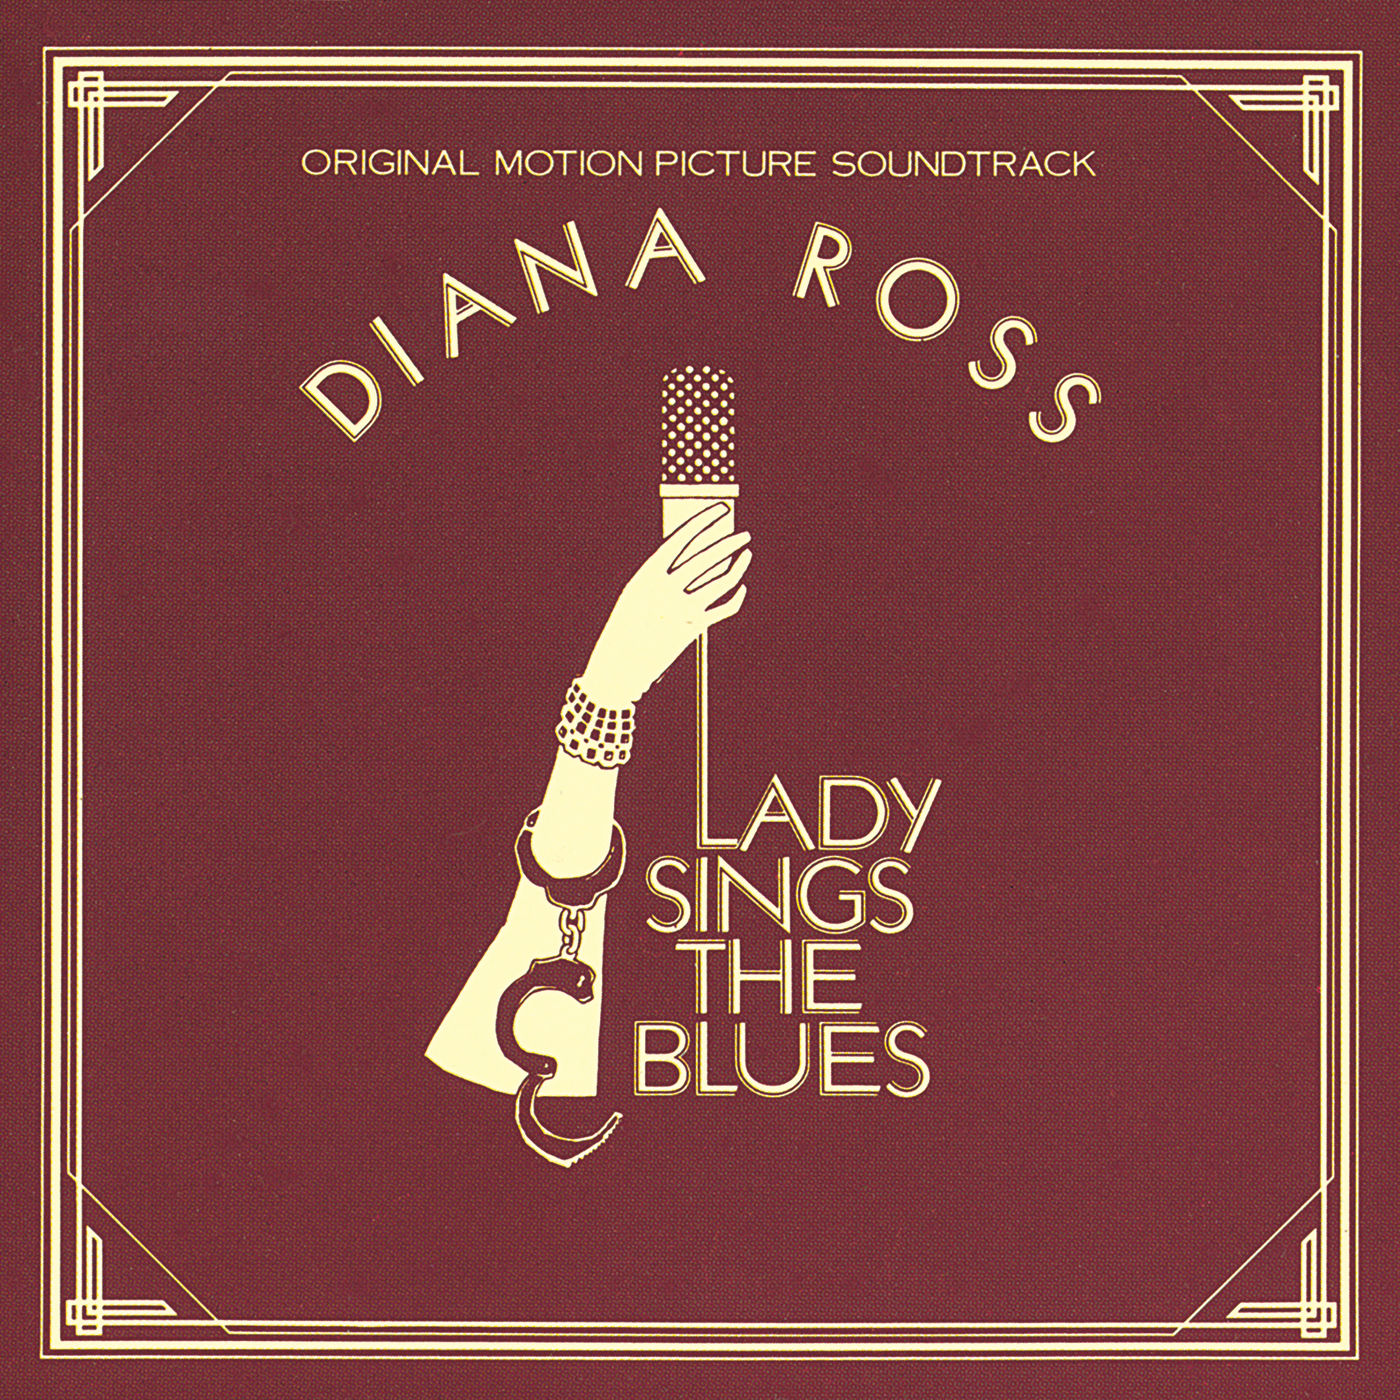 Diana Ross - 1972 - Lady Sings The Blues [2021 Motown Records] 24-192